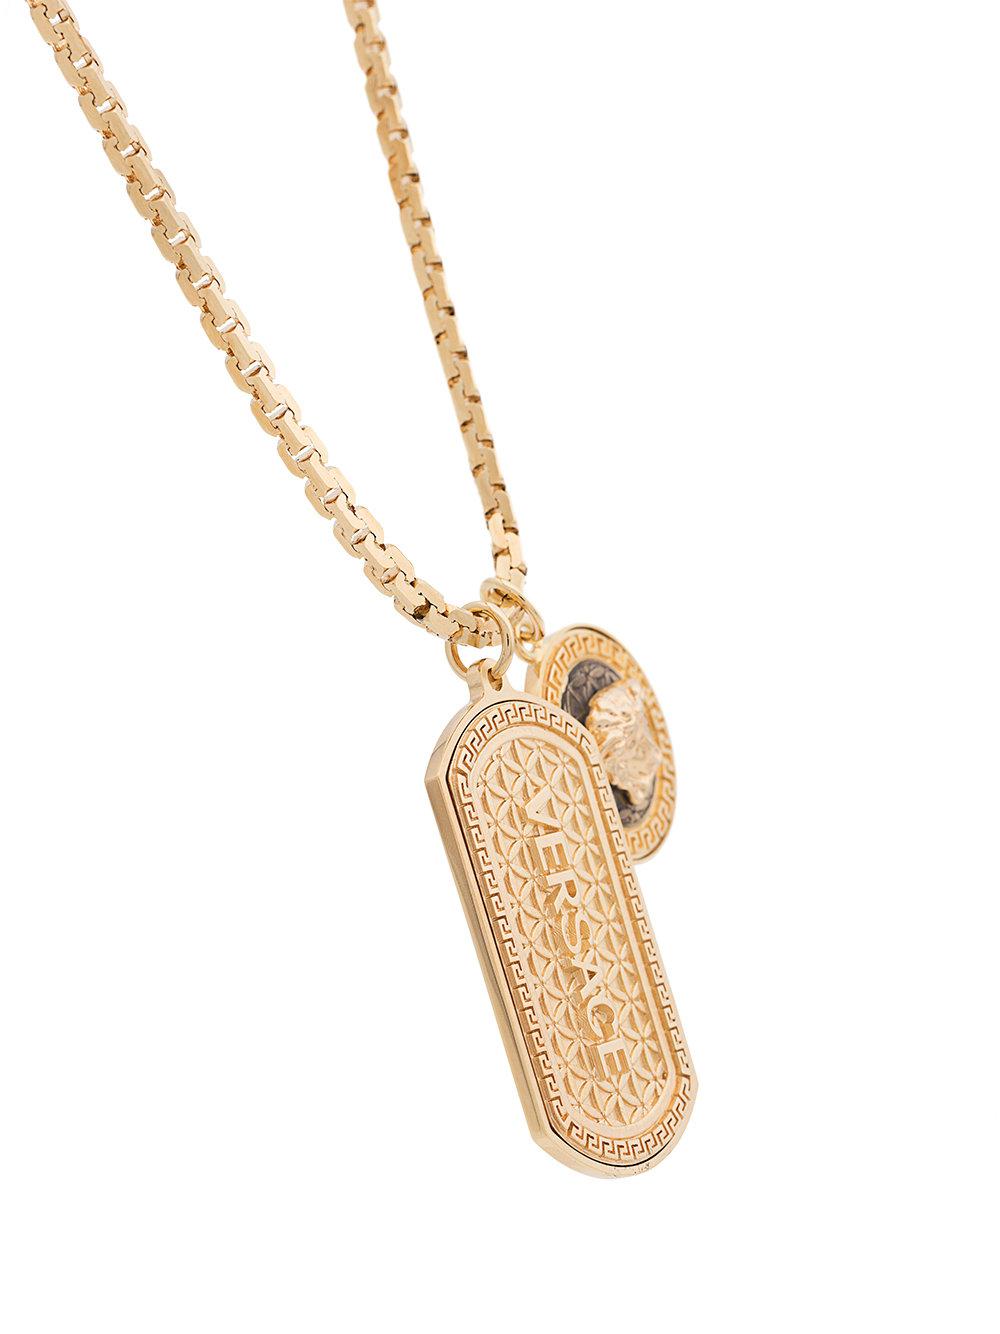 Versace Gold Tone Dog Tag Necklace in Metallic for Men - Lyst